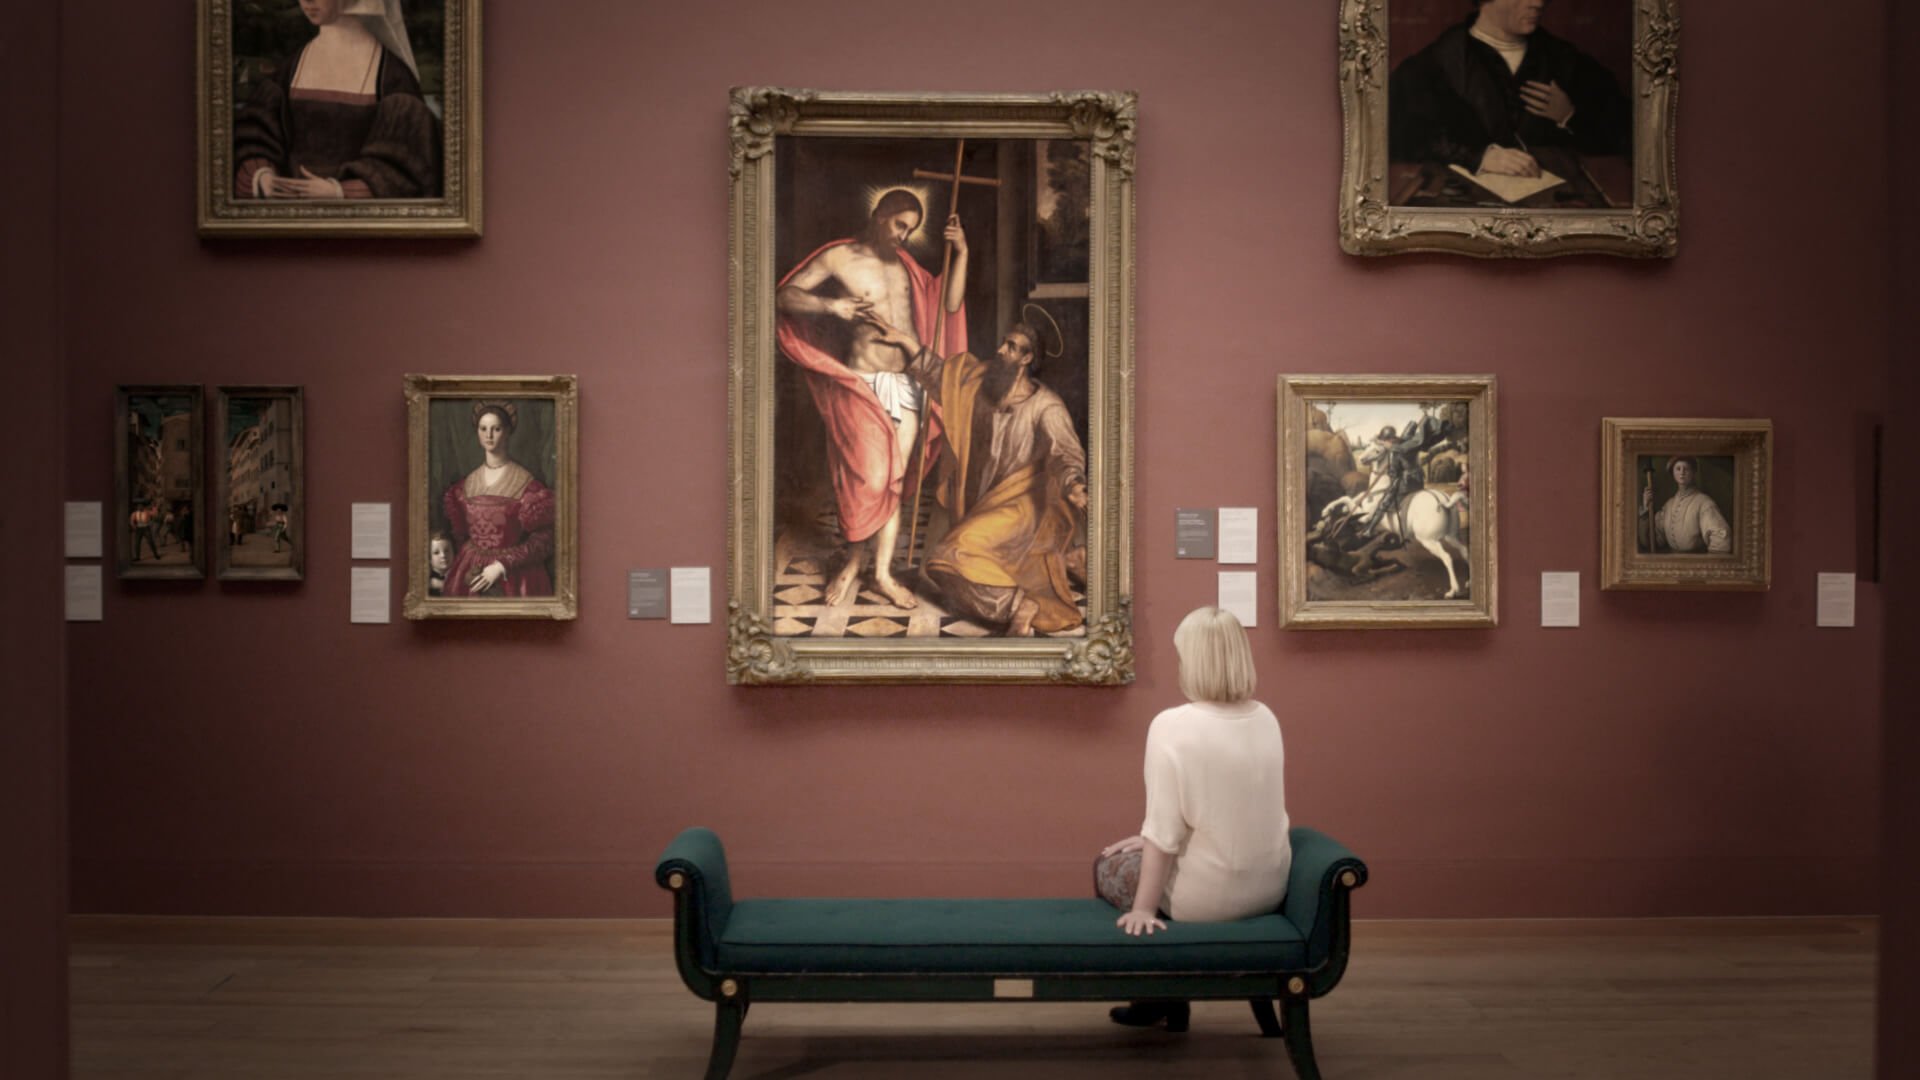 Simplify rules to allow local authority museums to sell items, says law firm Winckworth Sherwood